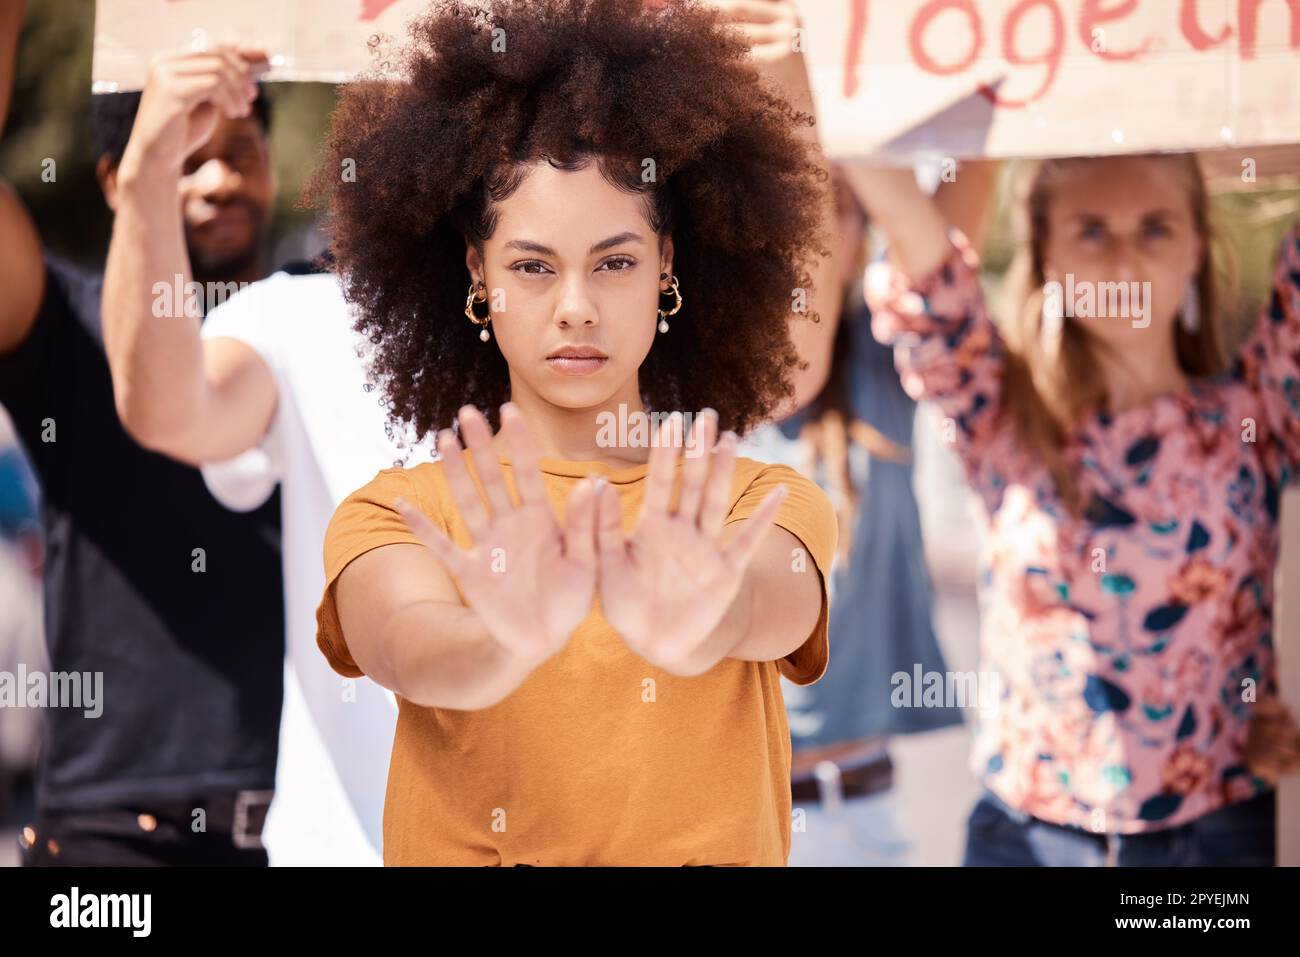 Protest, hands and stop with a black woman activist in demonstration with a group of people ready to fight for freedom. Community, politics and rally with a young female standing against violence Stock Photo